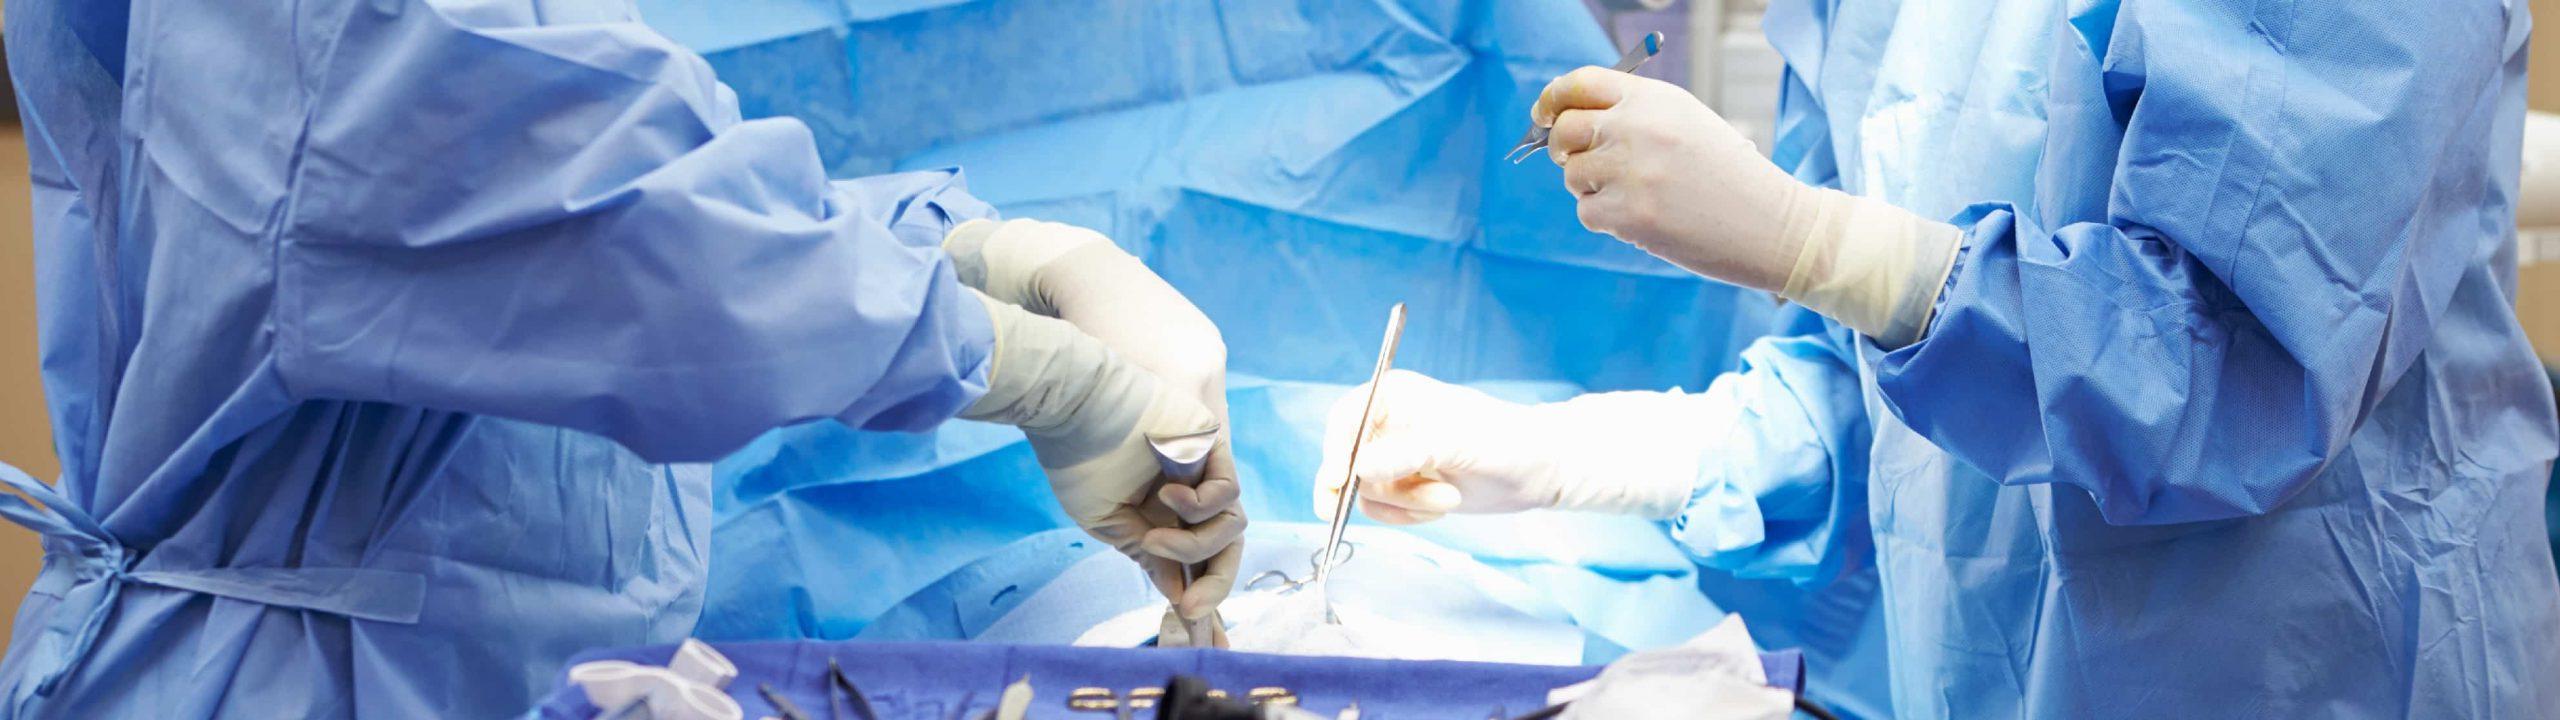 Surgeons operate on a patient in an operating room